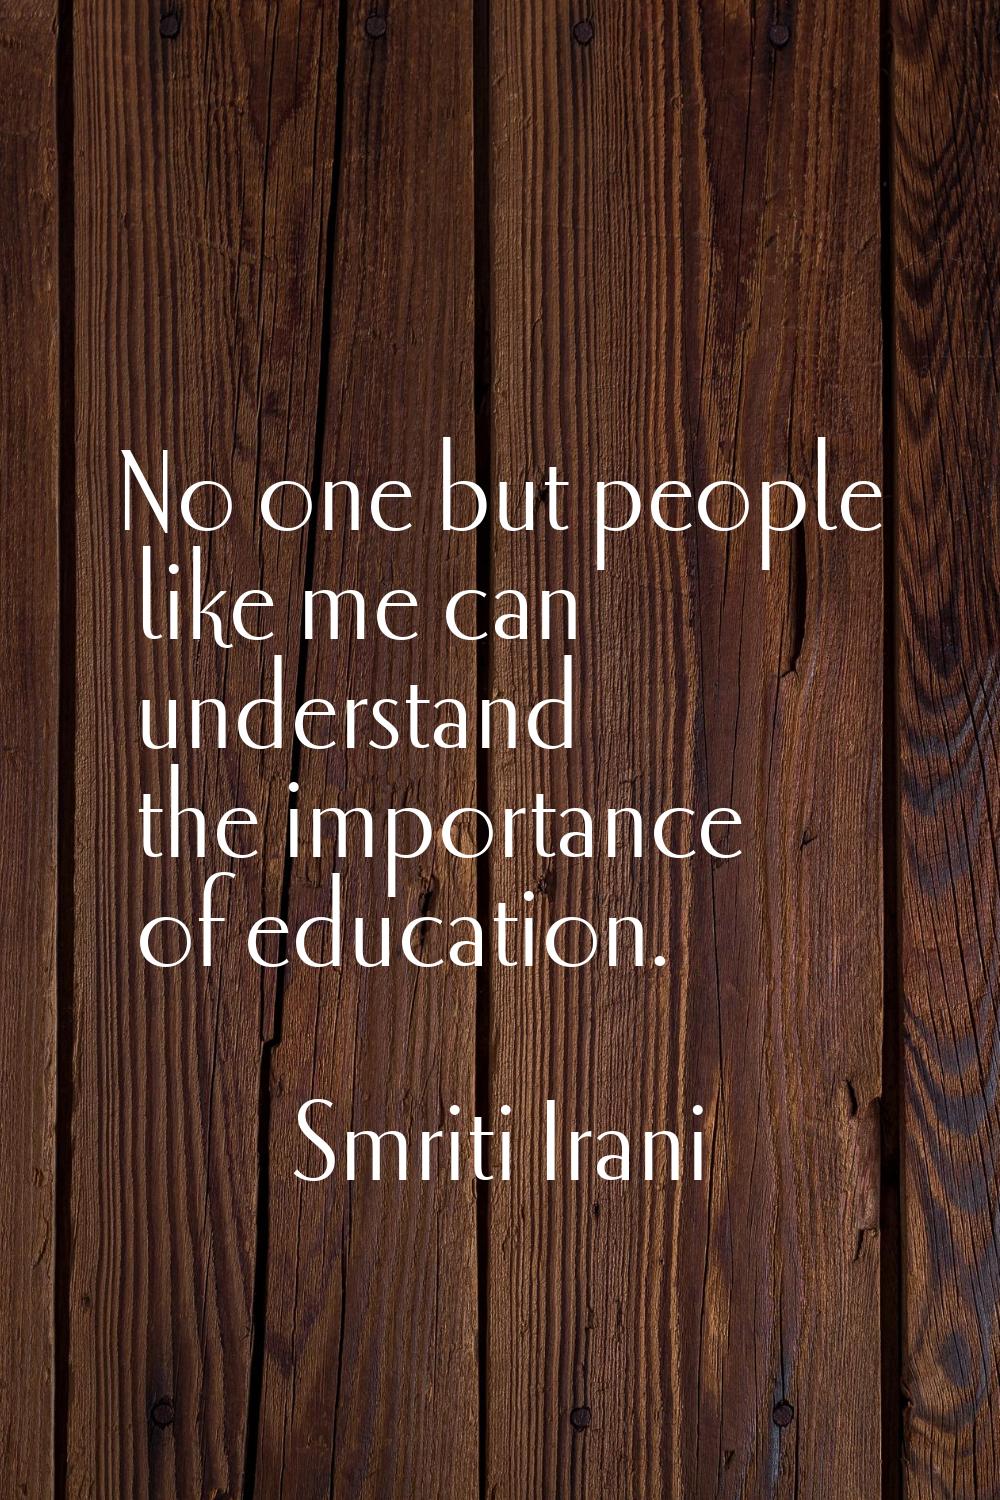 No one but people like me can understand the importance of education.